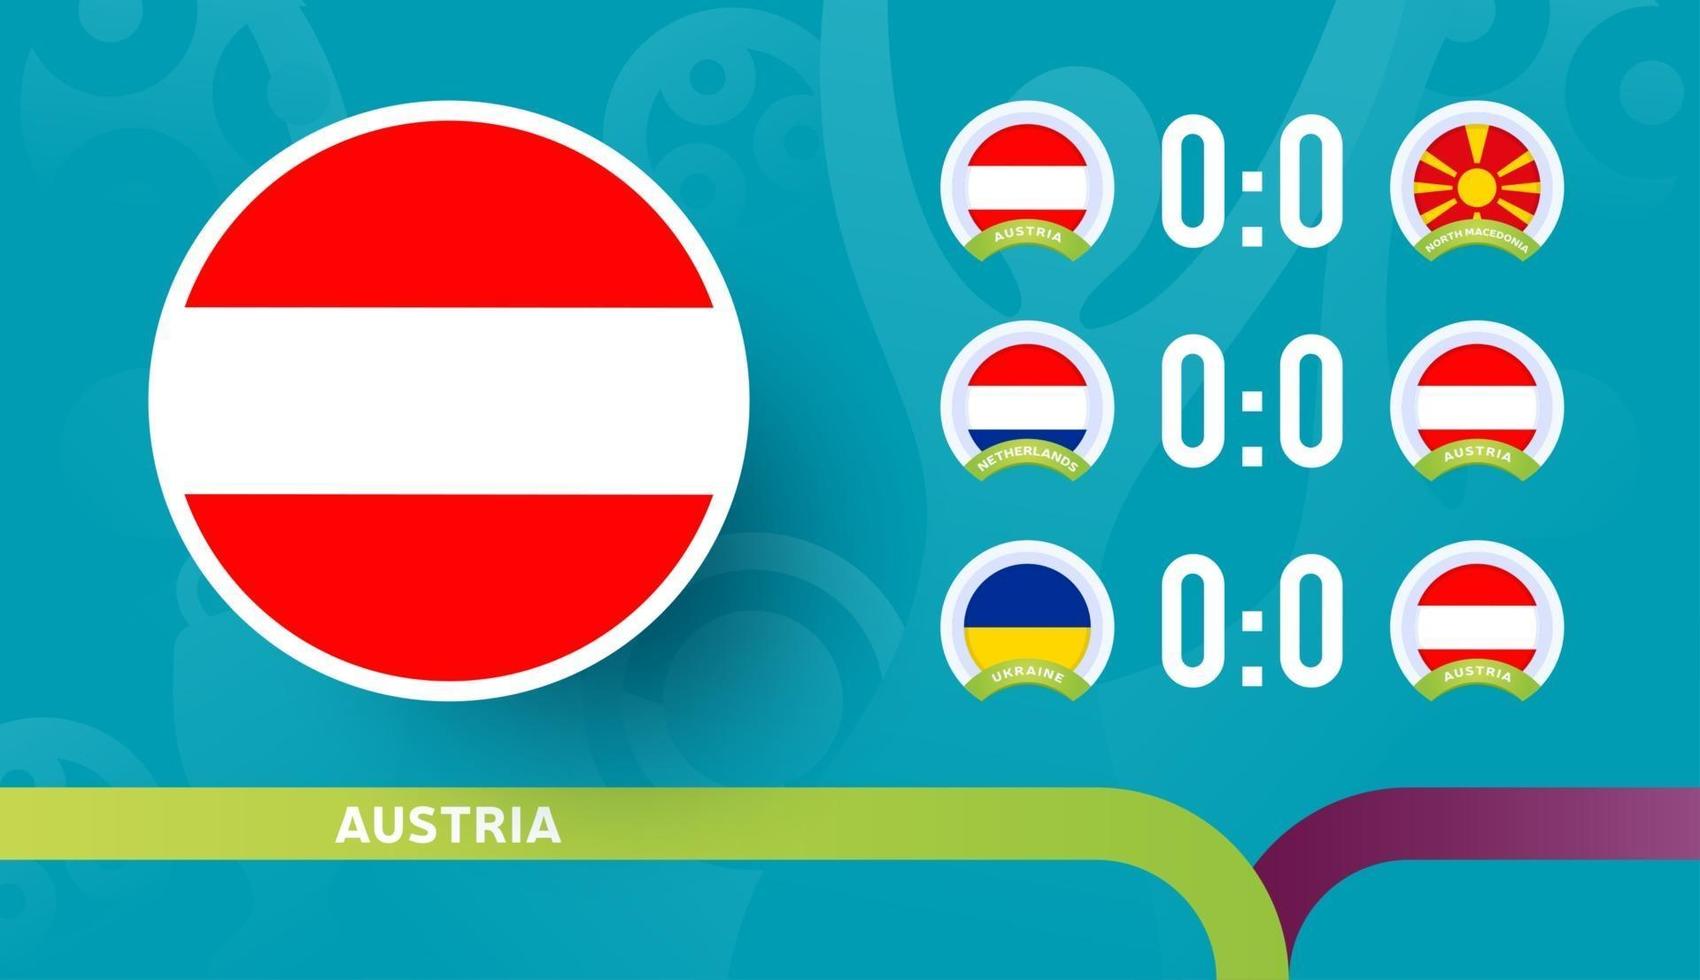 austria national team Schedule matches in the final stage at the 2020 Football Championship. Vector illustration of football 2020 matches